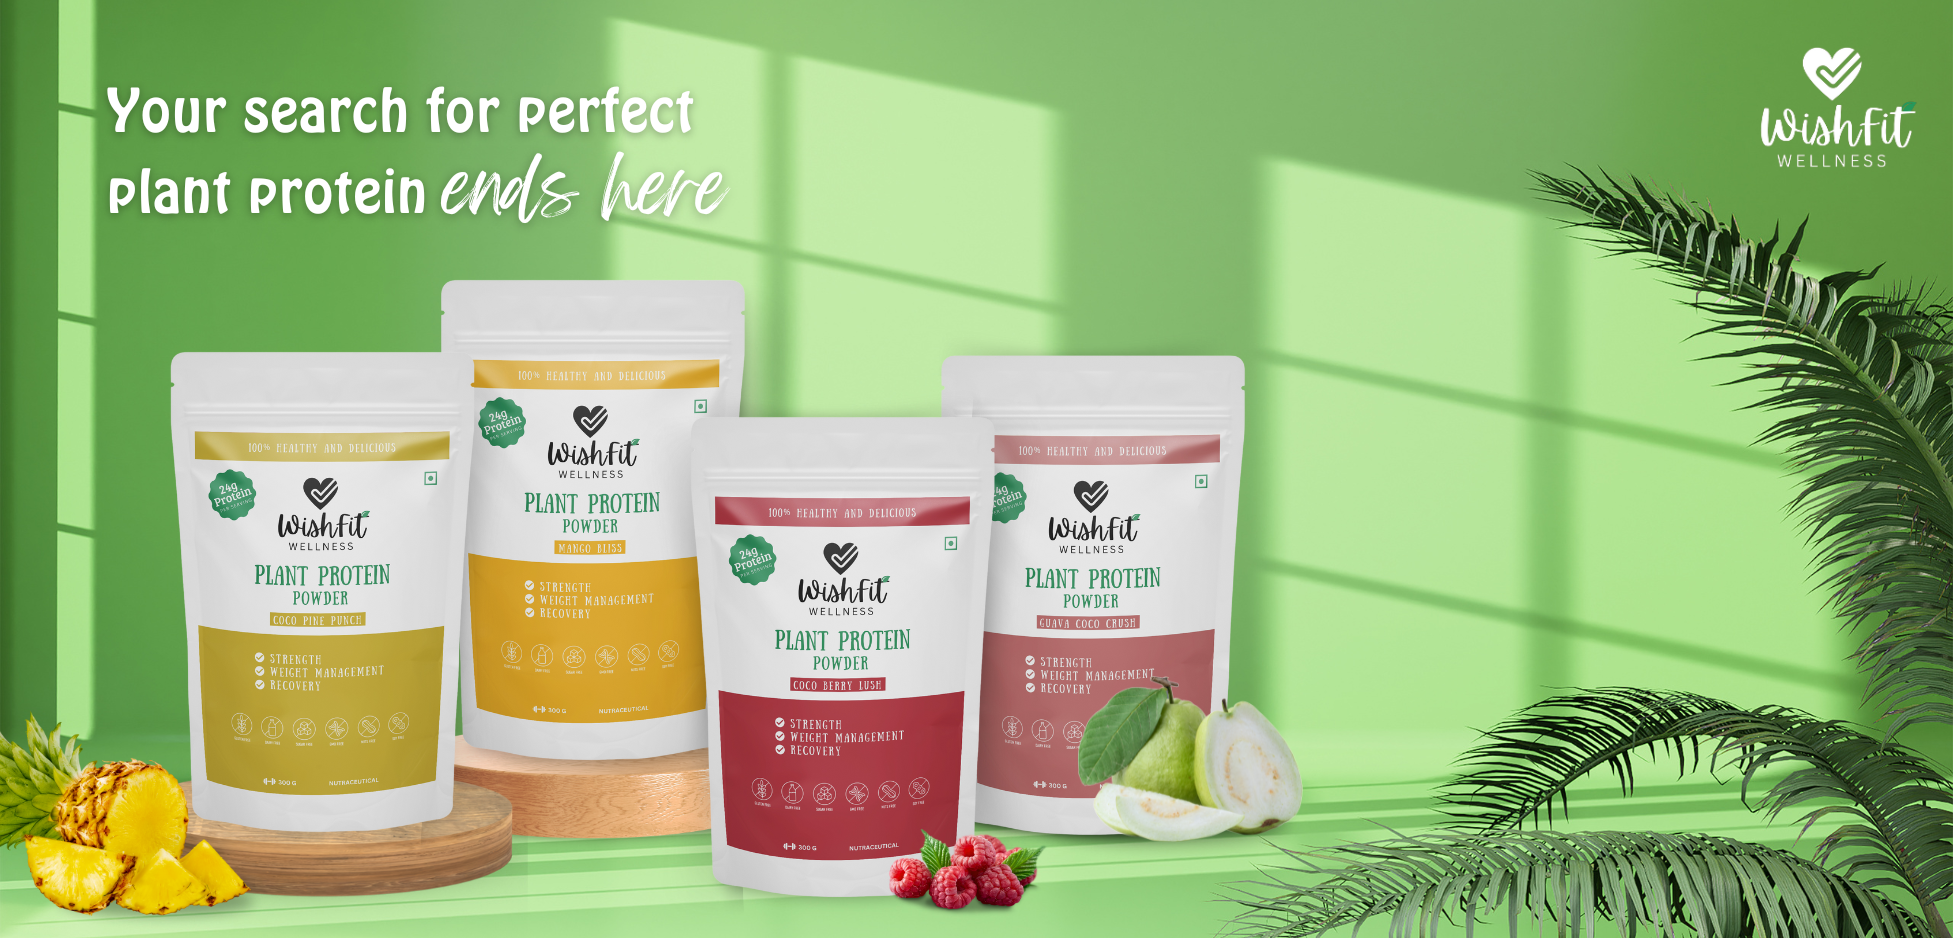 Your search for perfect plant protein ends here - WishFit Plant Protein